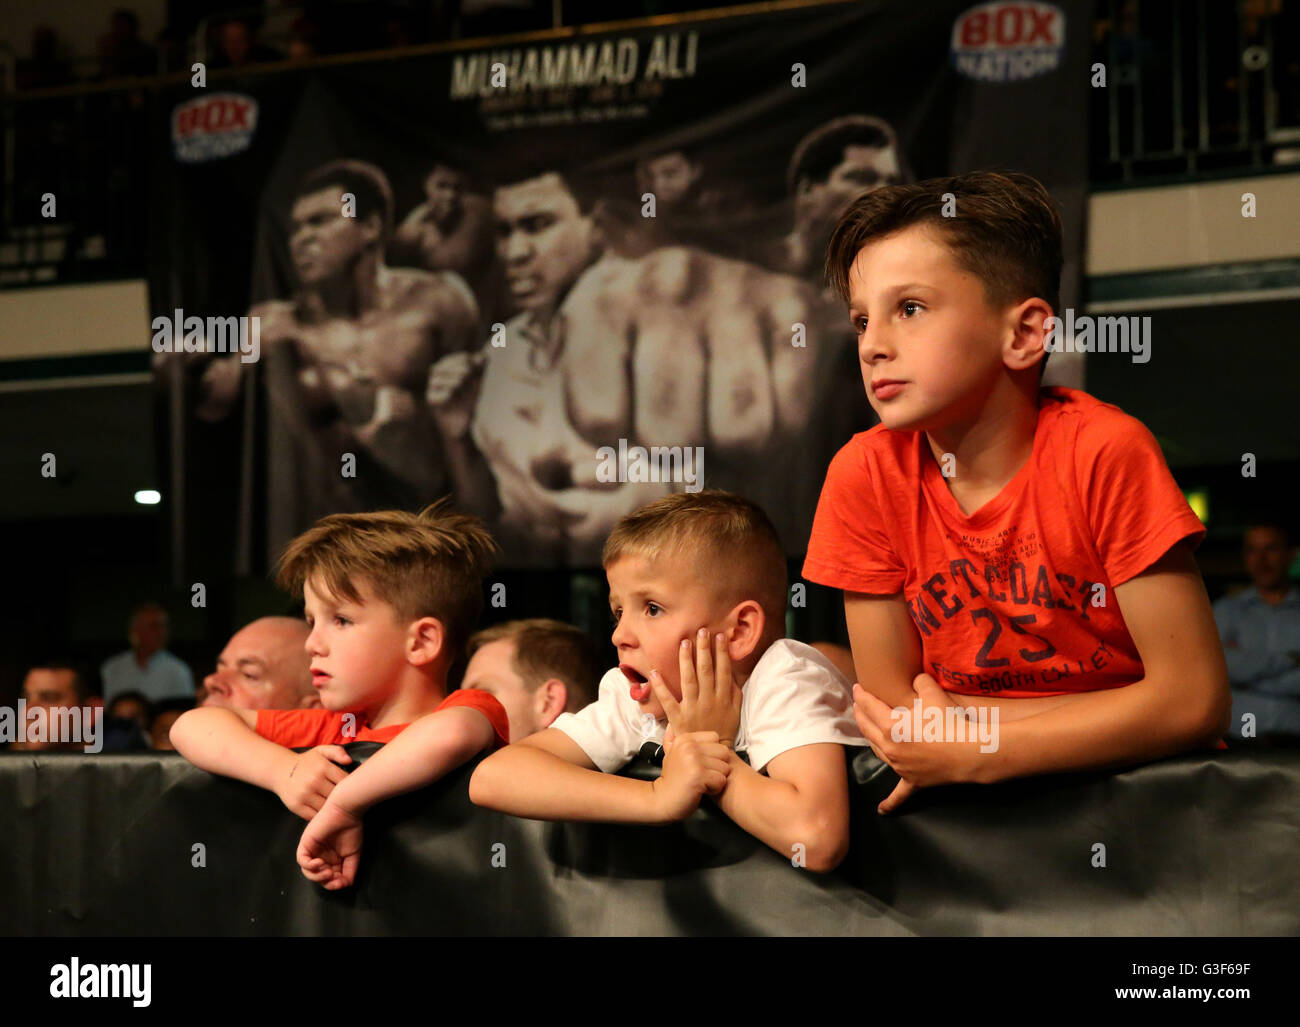 Tom Baker son's cheering him on during the International Light-Heavyweight Contest at York Hall, London. PRESS ASSOCIATION Photo. Picture date: Friday June 10, 2016. Photo credit should read: Steven Paston/PA Wire Stock Photo